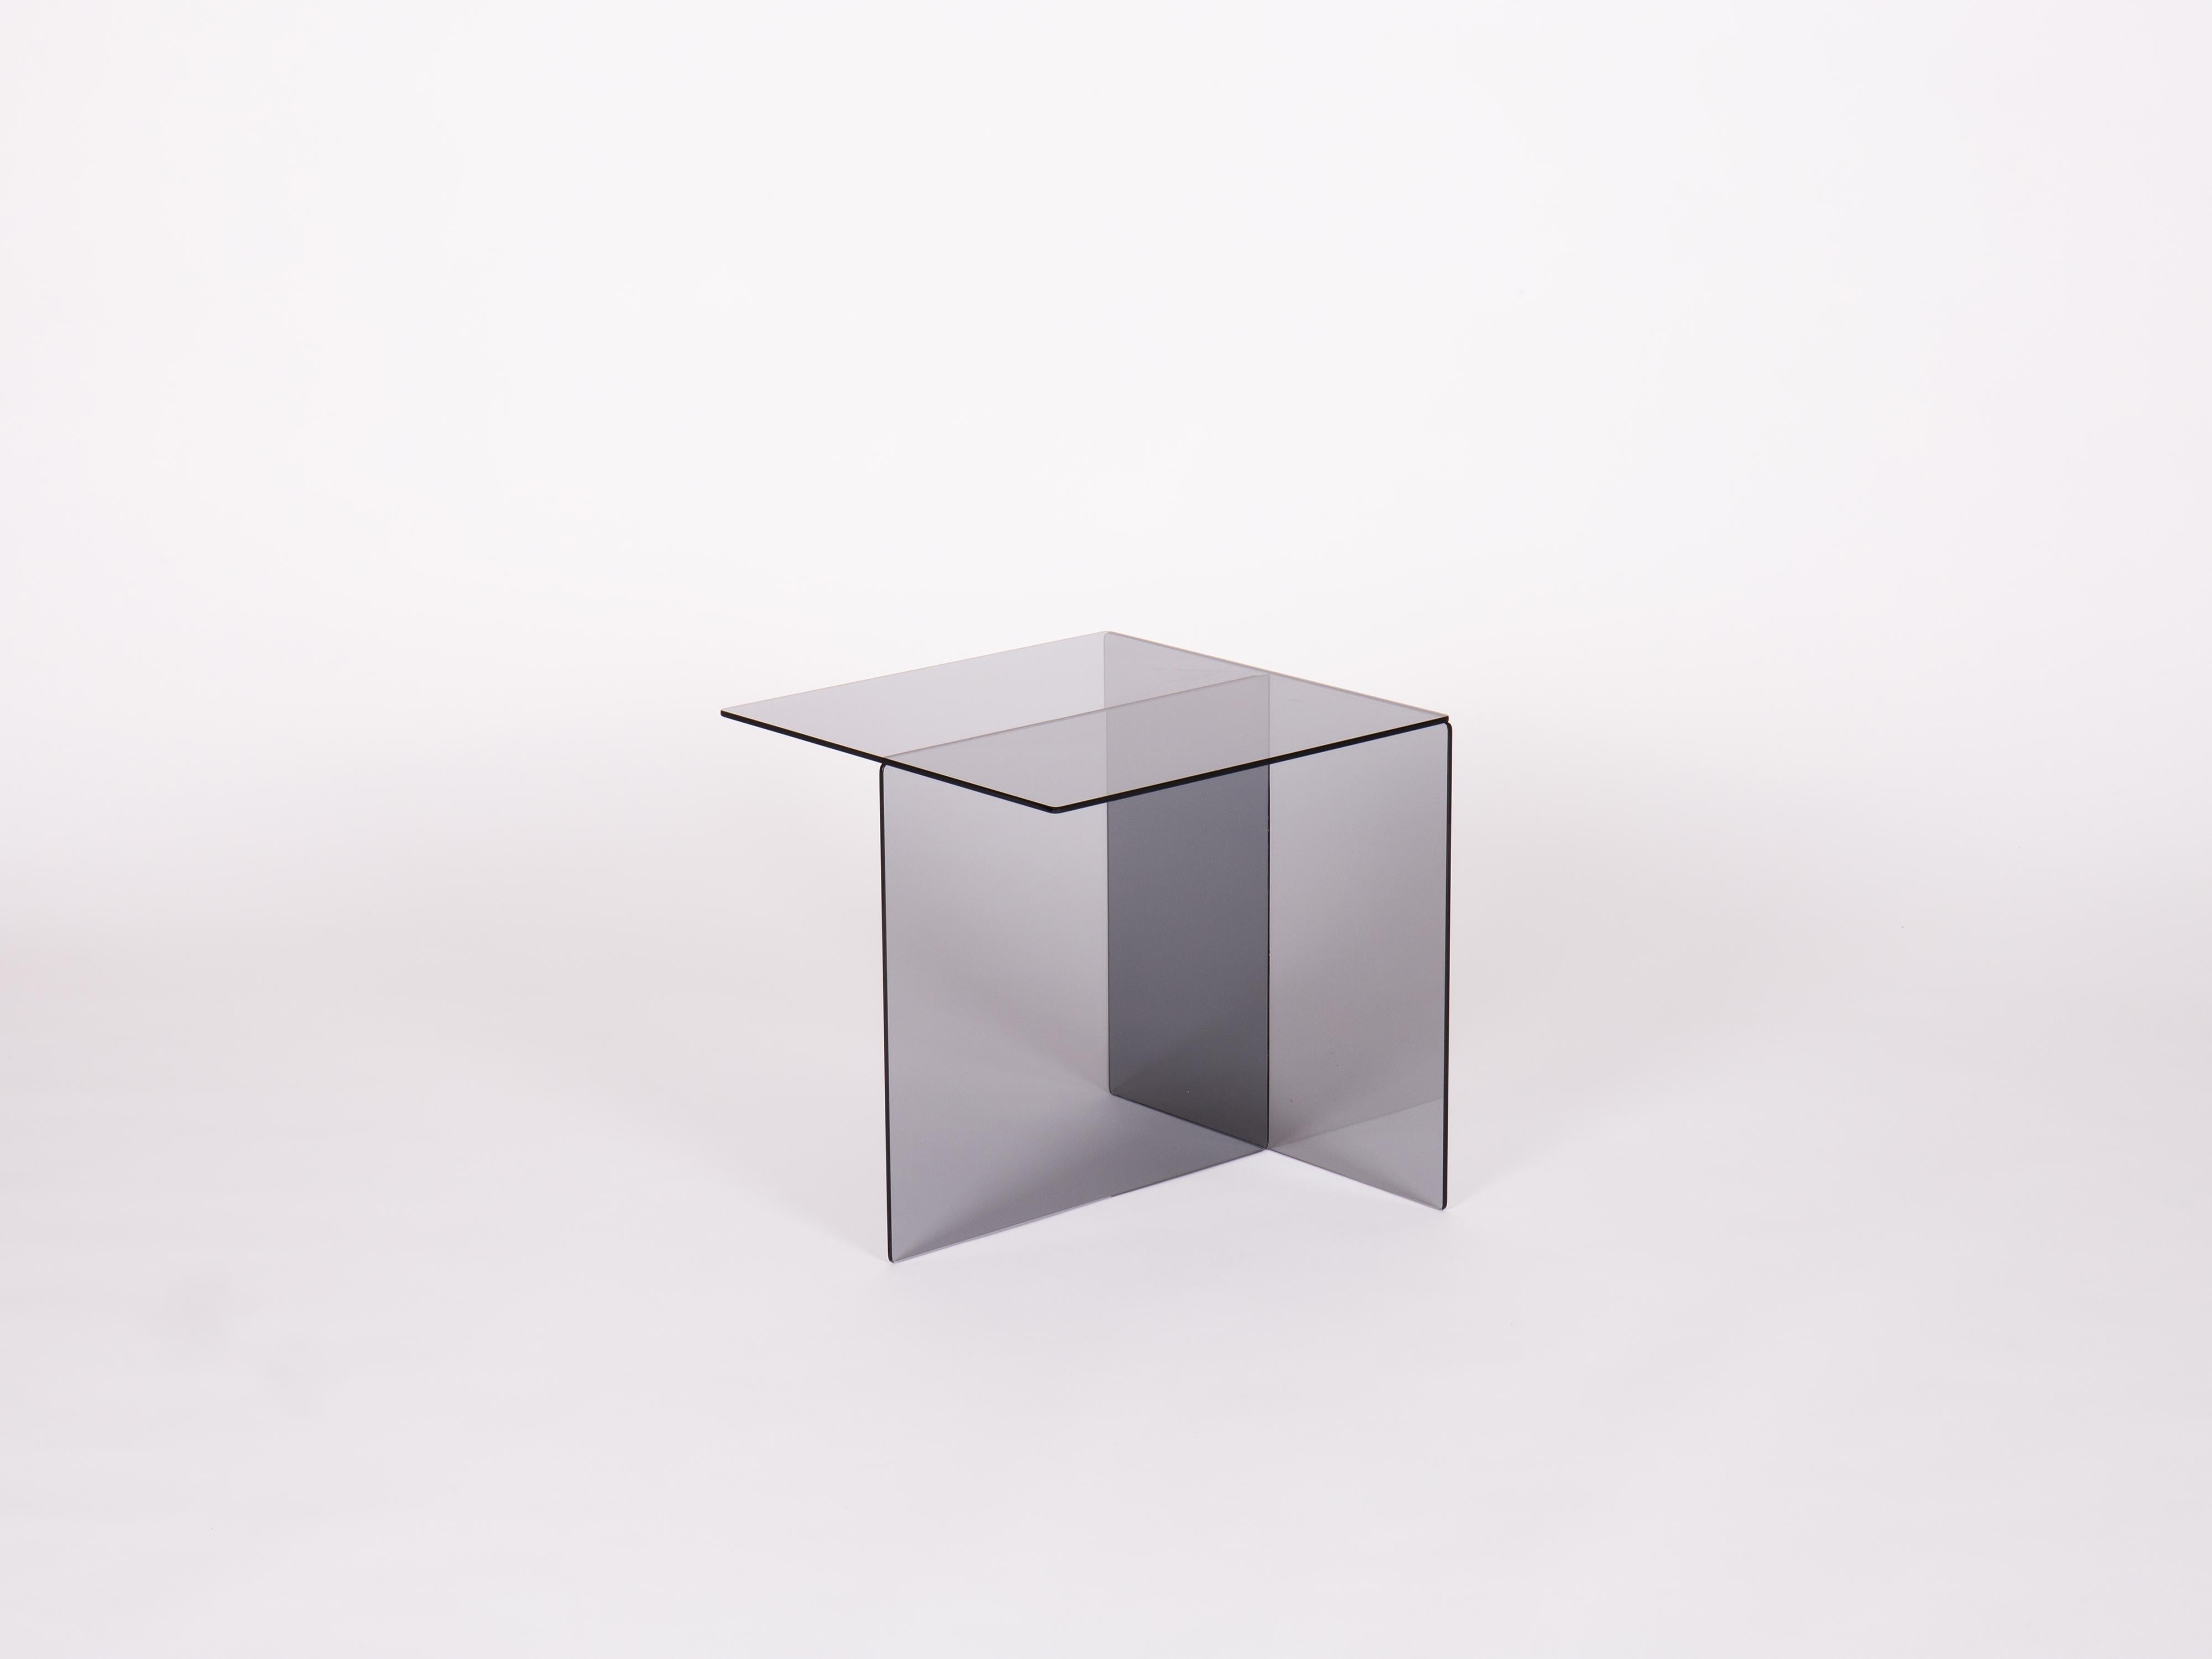 Designed in 1967 - Paradisoterrestre Edition 2023

Materials: glass

Colours: smoked grey or bronze 

Designed by Augusto Betti in 1967, Glass coffee table consists of a smoked glass element whose cubic conformation allows for different